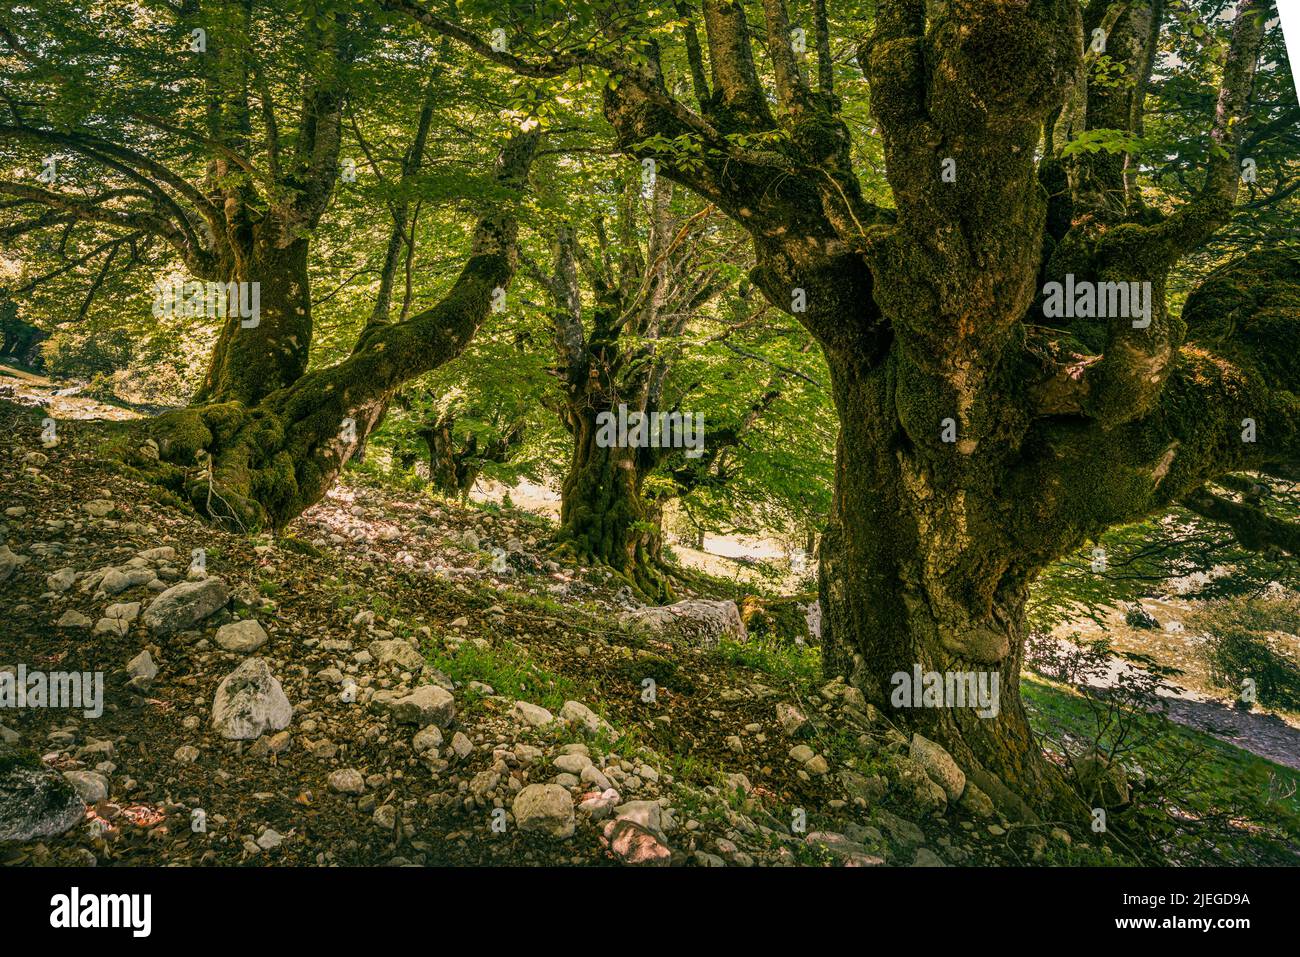 Old beech trees in an ancient forest in the National Park of Abruzzo Lazio and Molise. Abruzzo, Italy, Europe Stock Photo